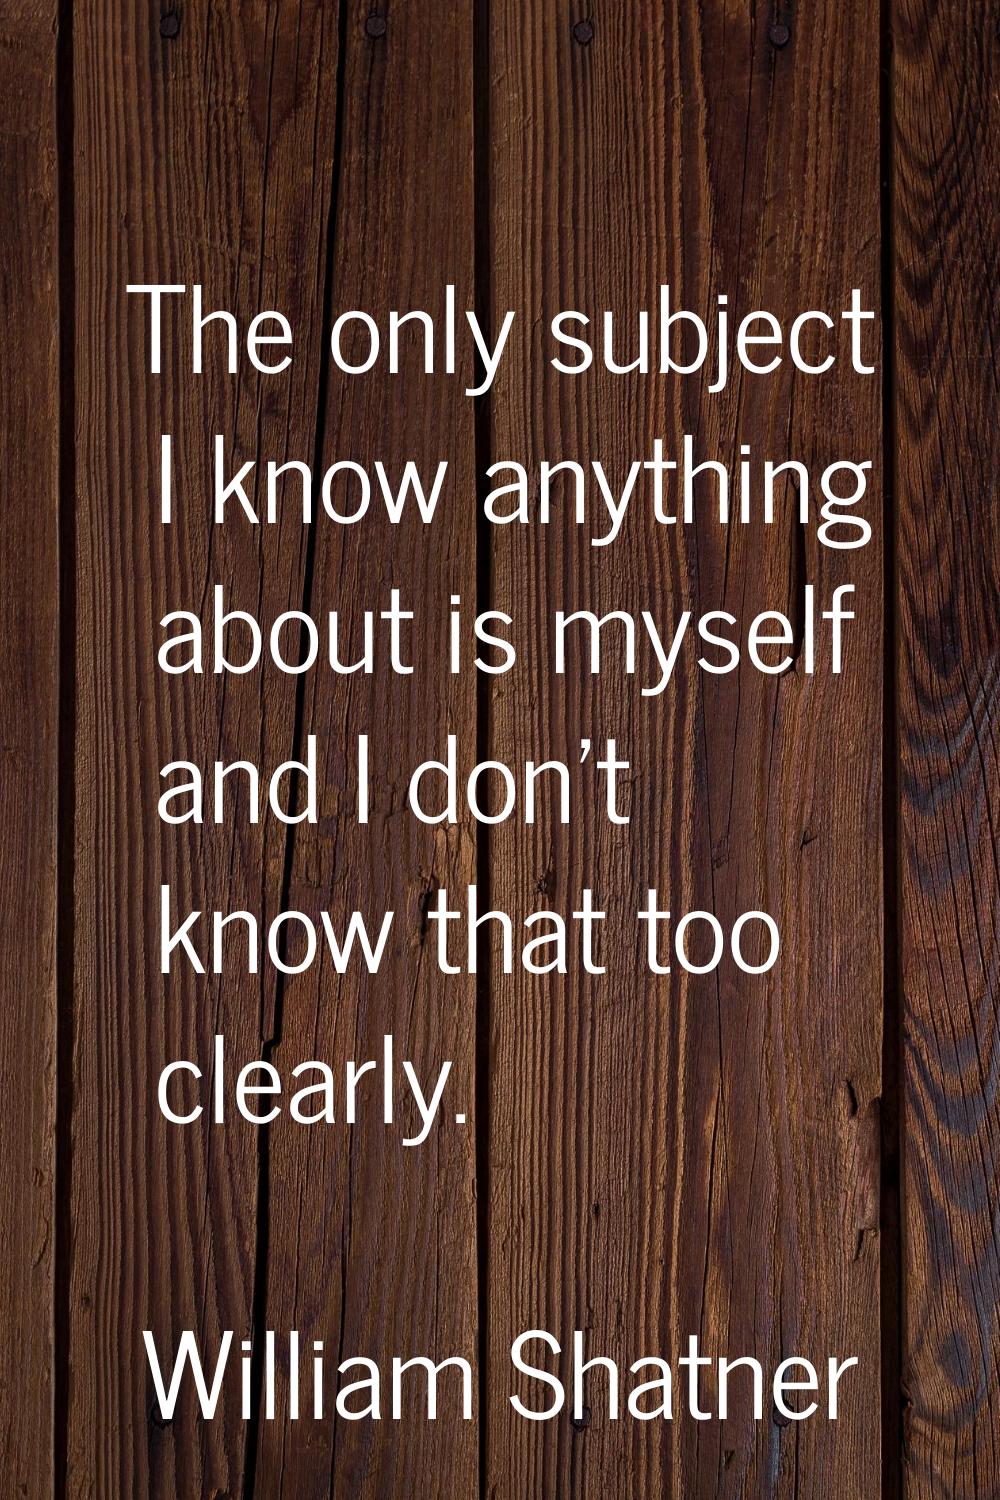 The only subject I know anything about is myself and I don't know that too clearly.